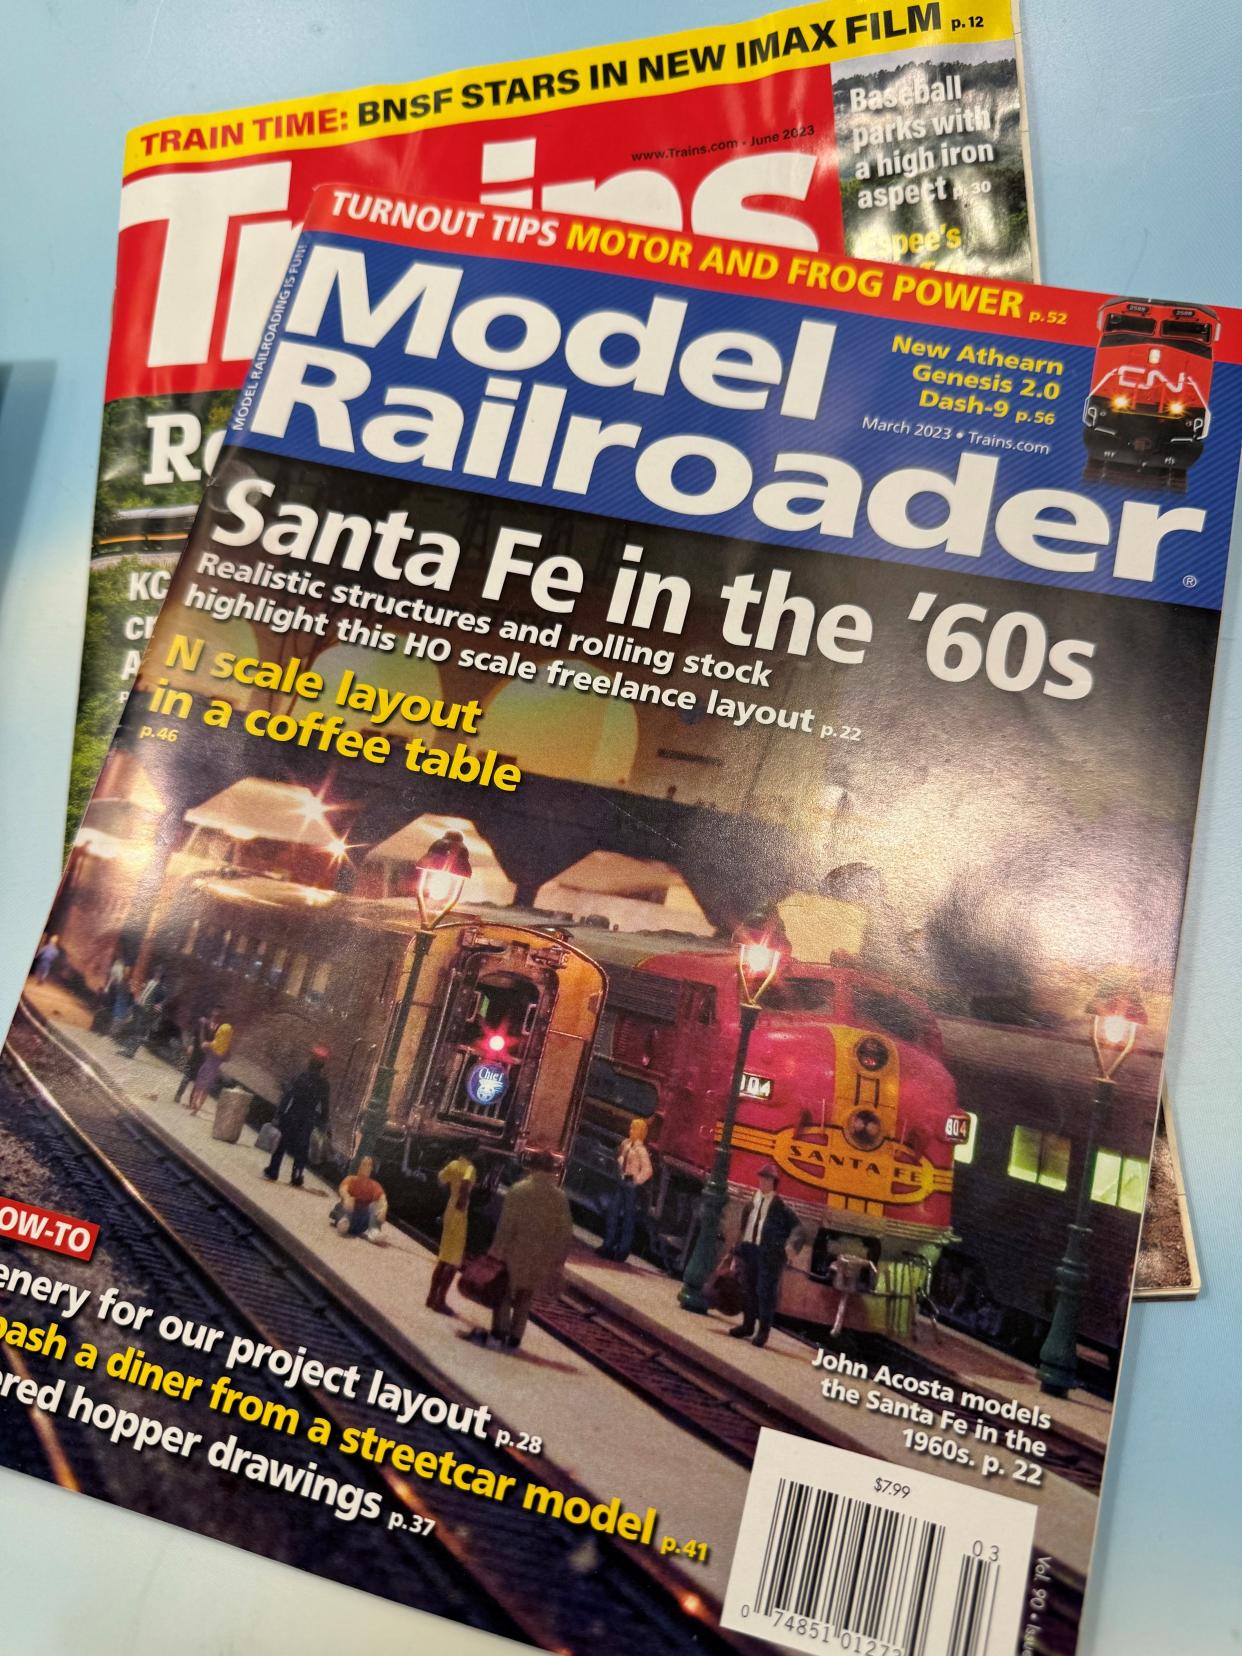 Kalmbach Media has sold its Model Railroader and other magazines to Firecrown Media